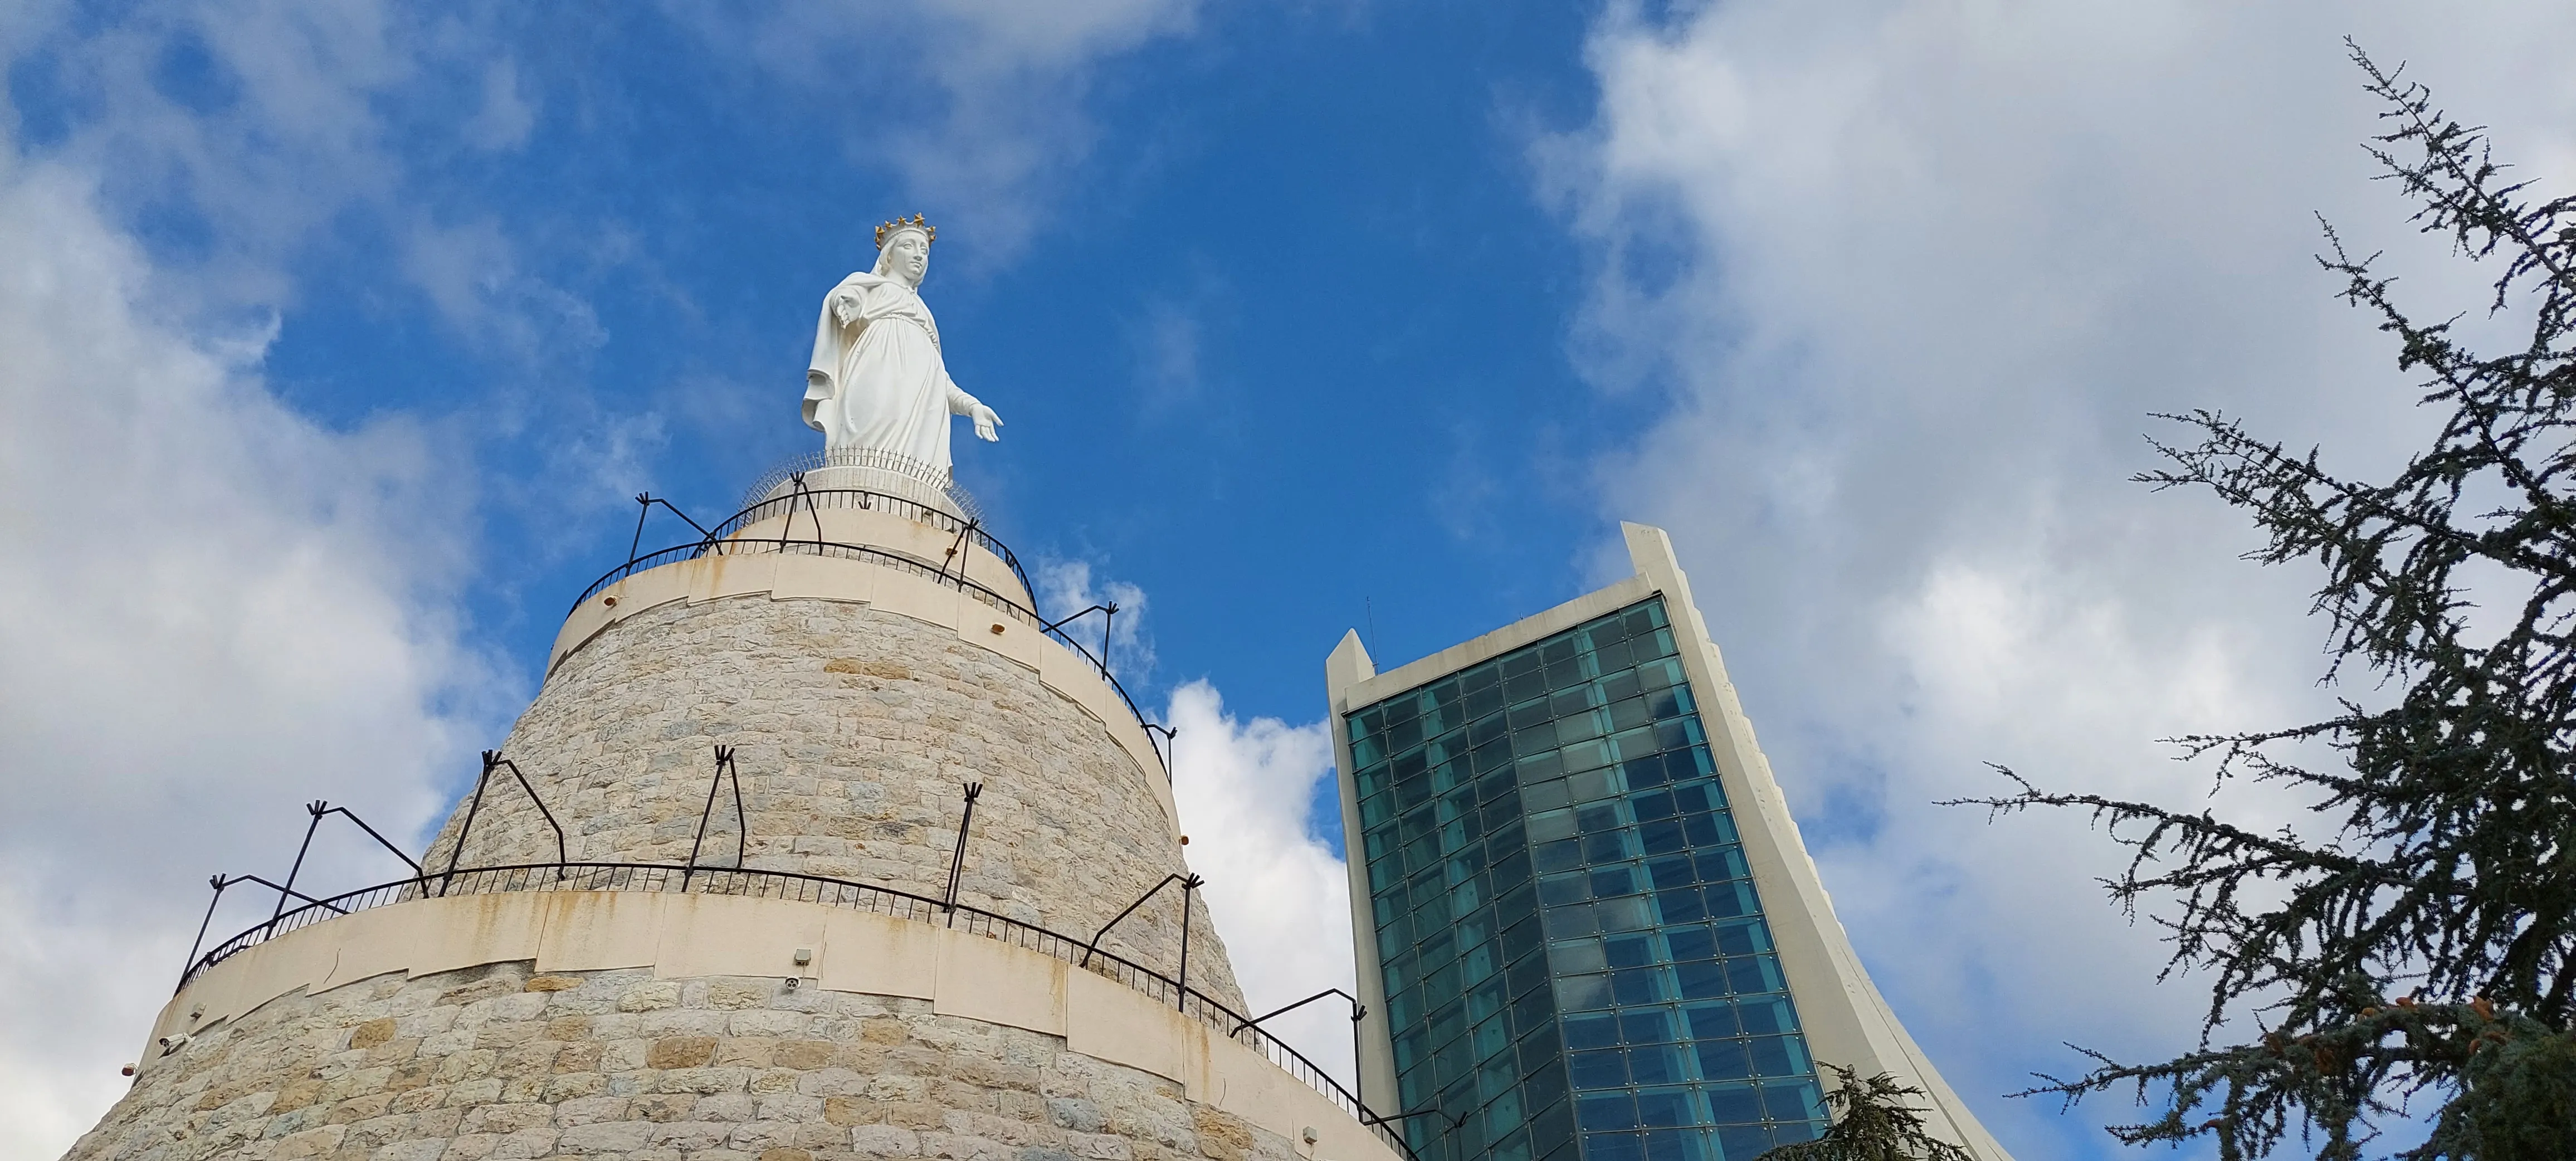 The Shrine of Our Lady of Lebanon in Harrissa.?w=200&h=150